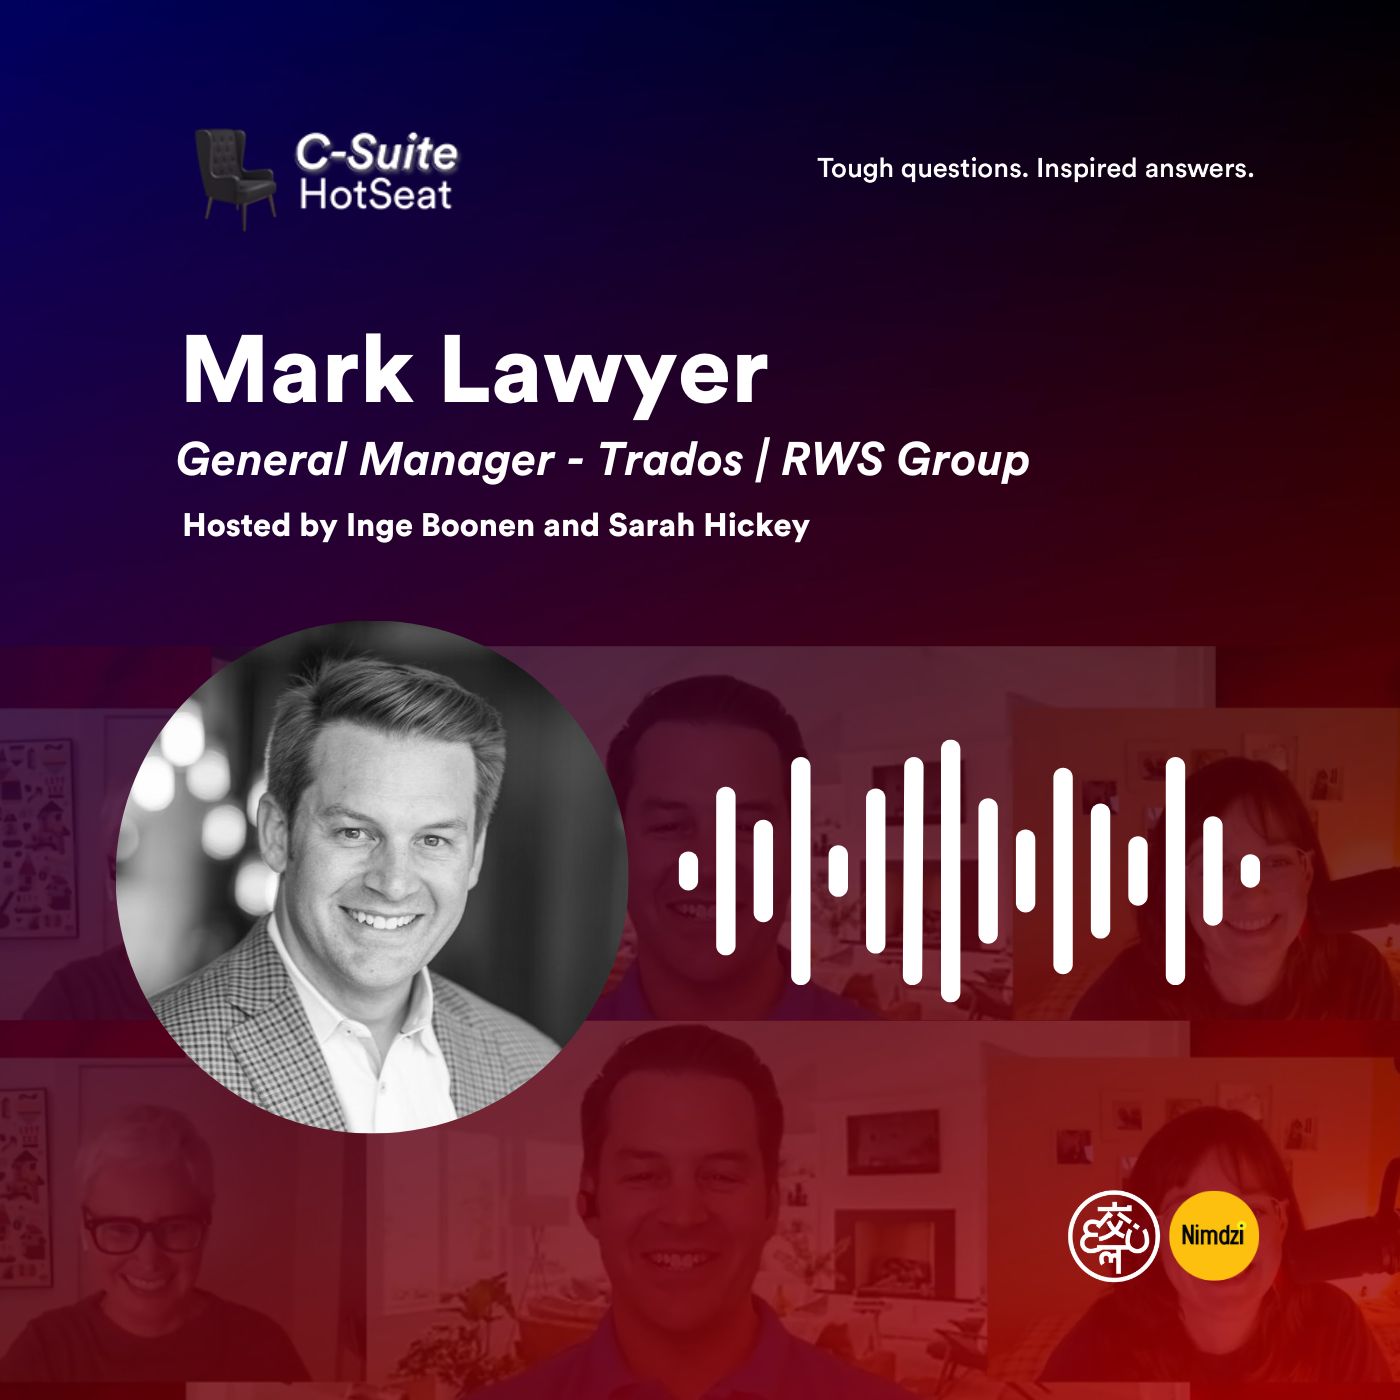 Be your authentic self with Mark Lawyer, General Manager of Trados | C-Suite HotSeat E39